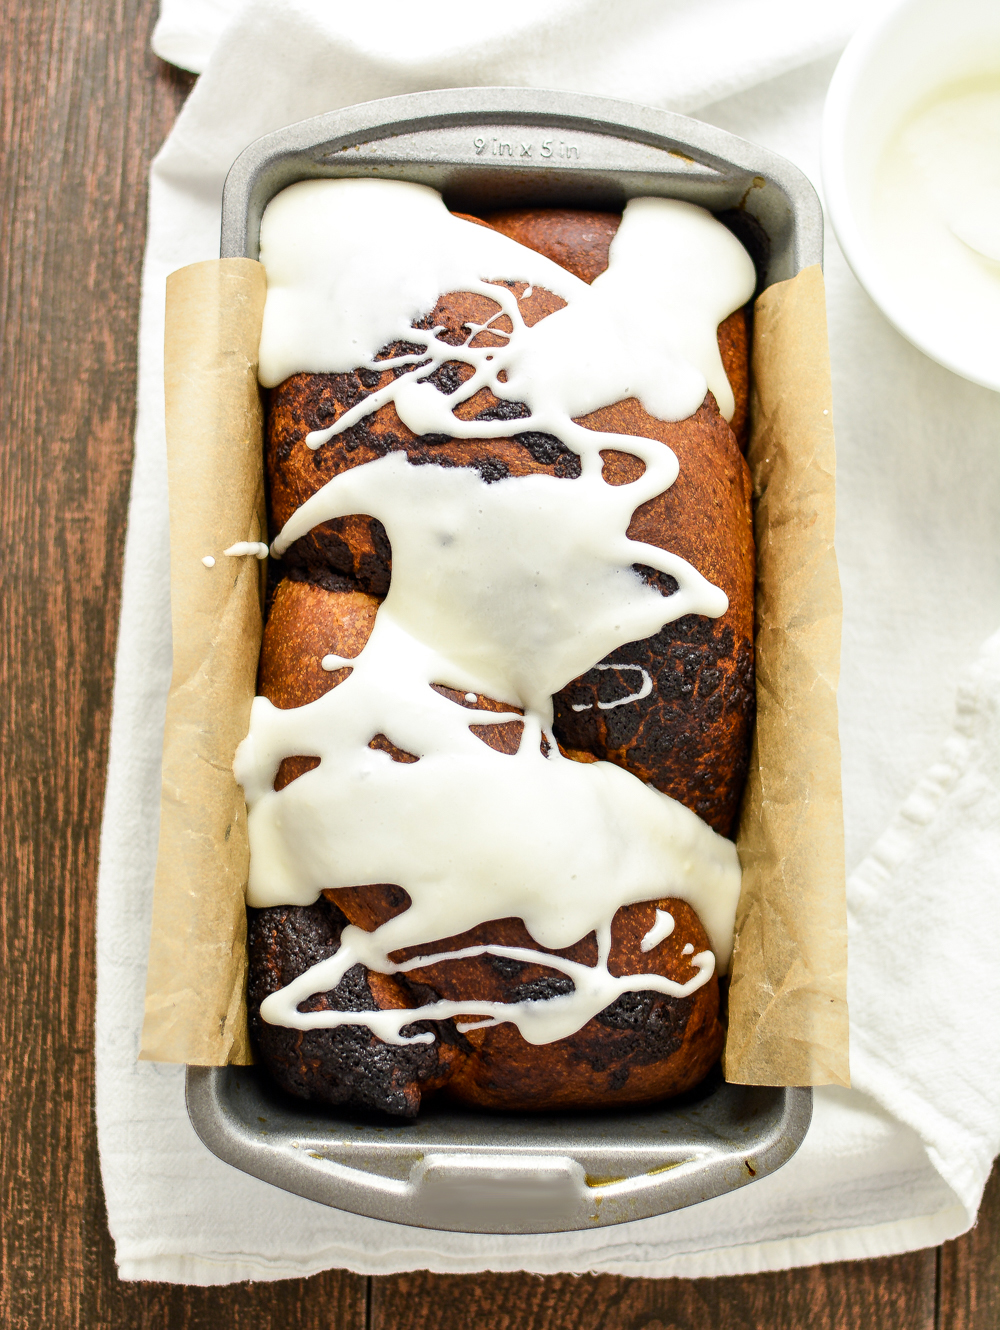 This not so traditional Chocolate Hazelnut Babka with Cream Cheese Glaze is the perfect sweet bread for breakfast or dessert!